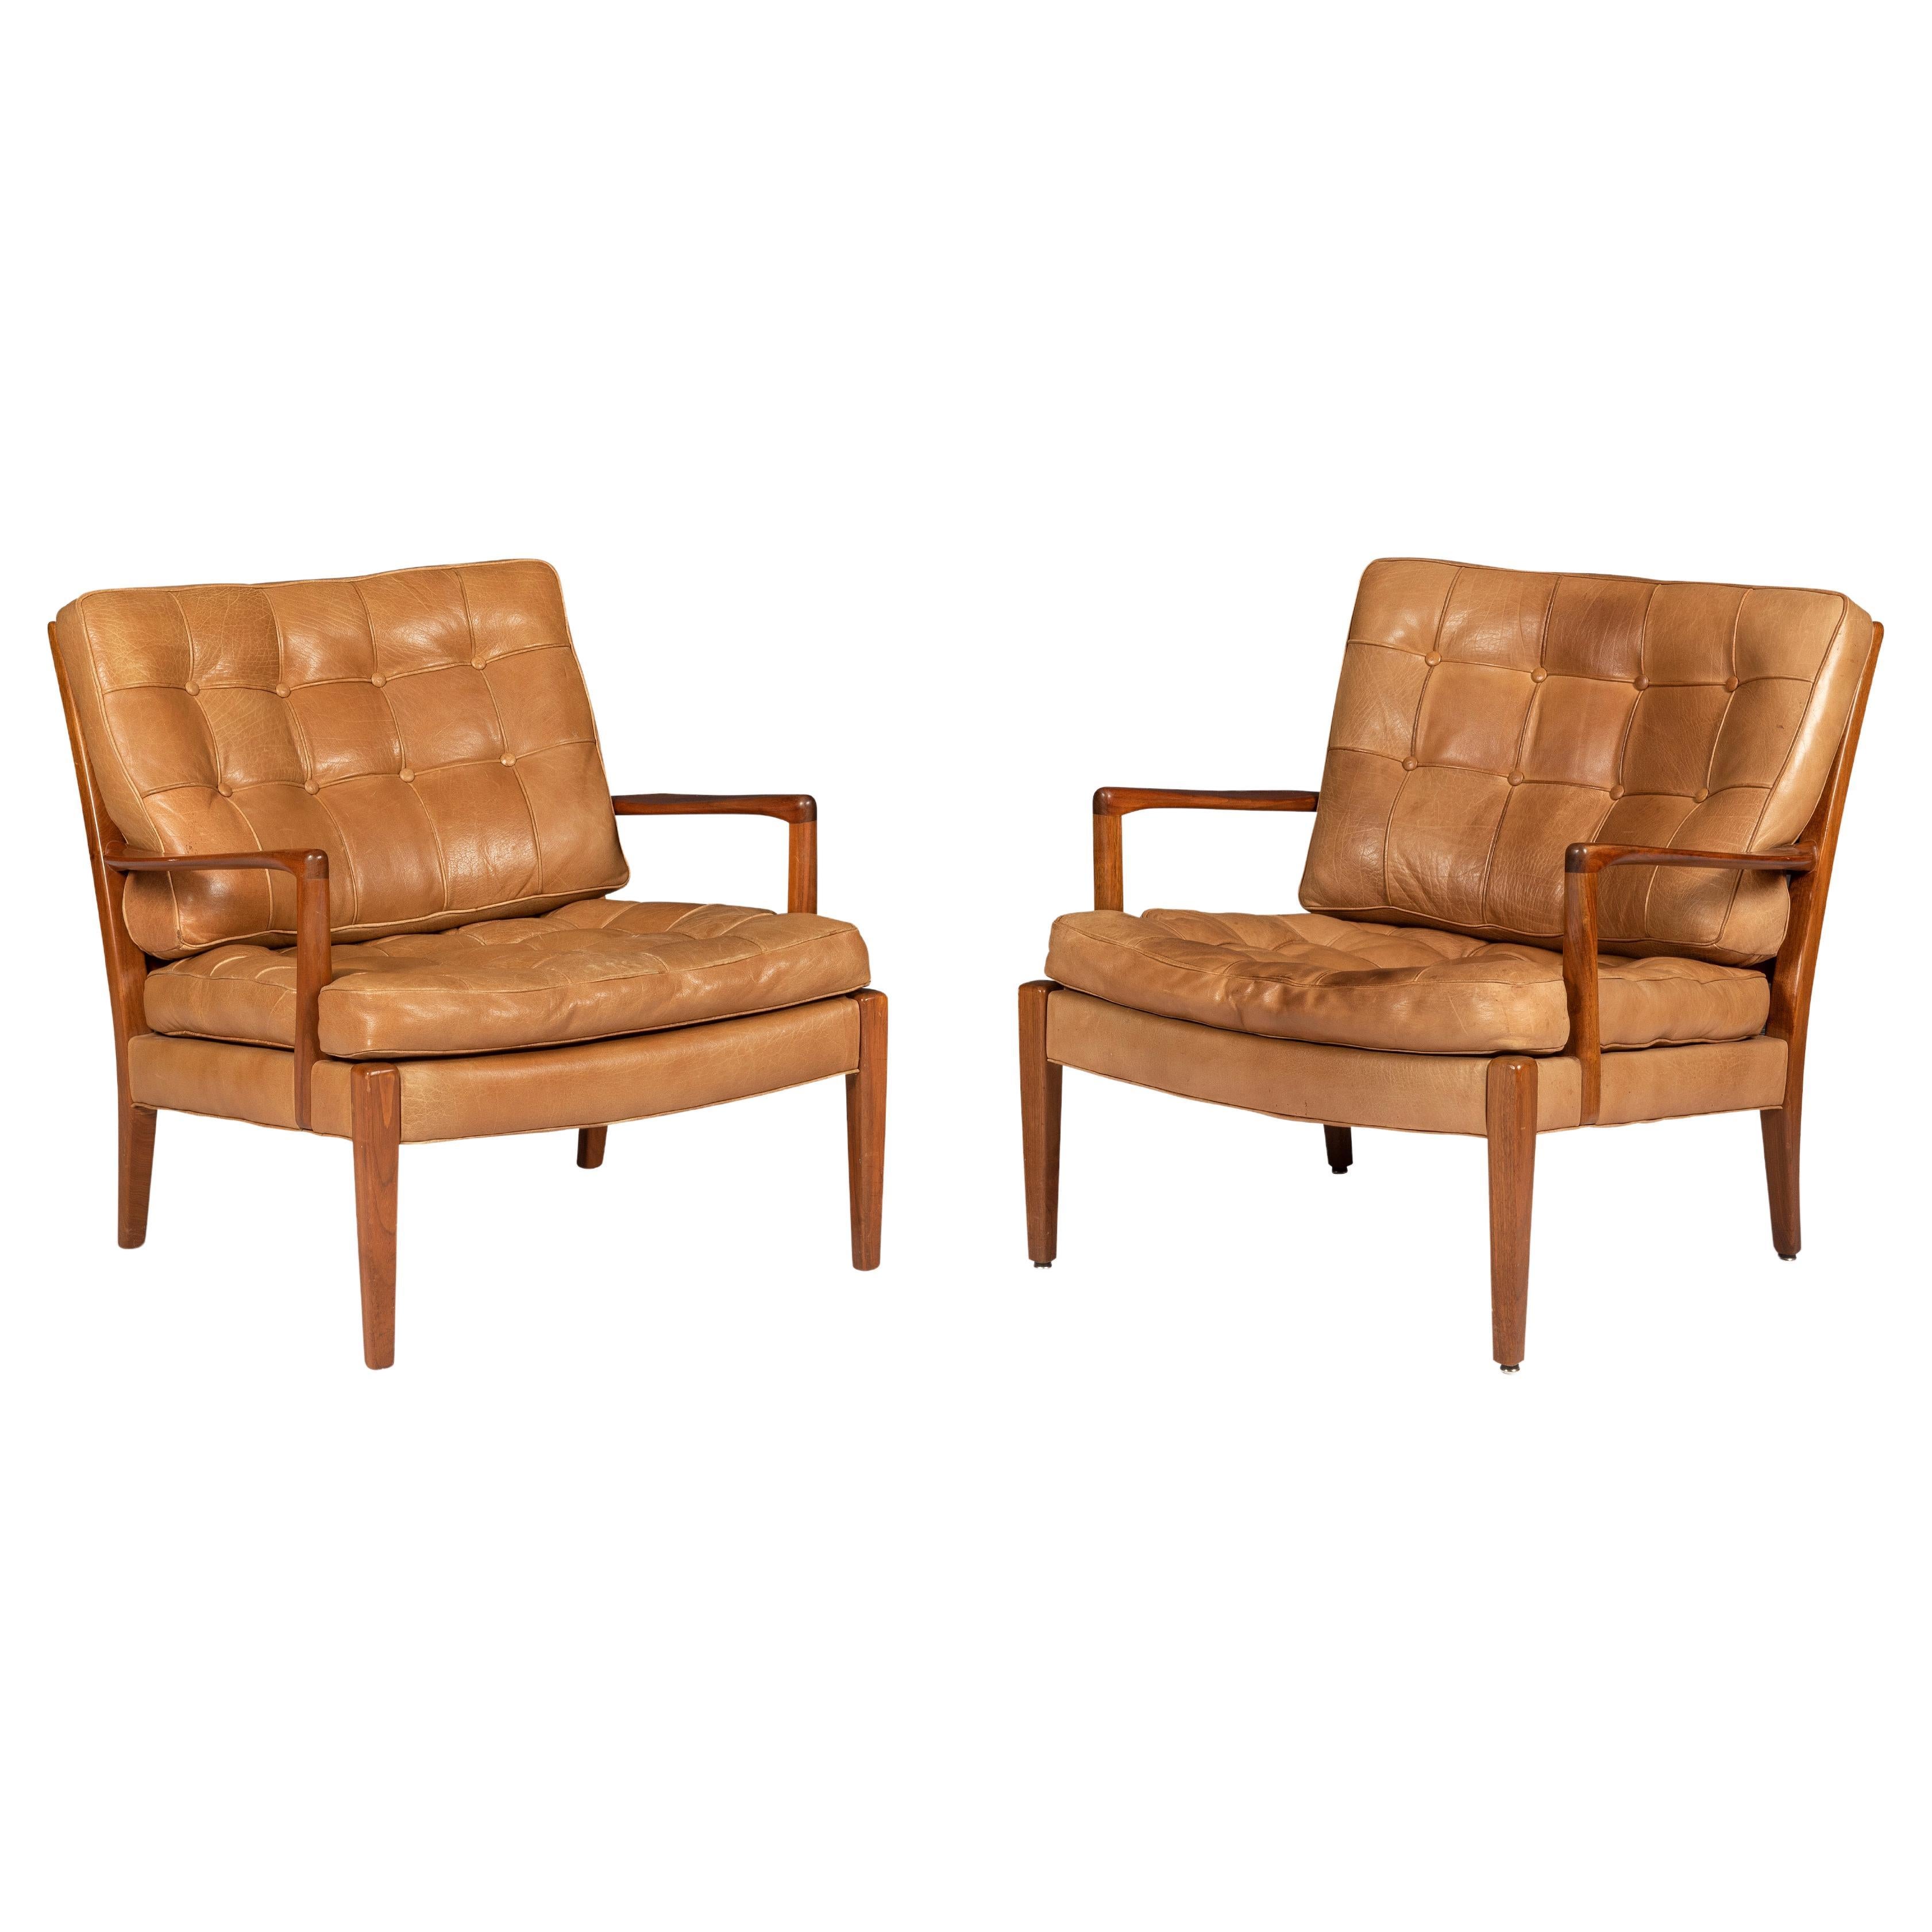 Arne Norell "Löven" Pair of Easy Arm Chair in Walnut and Leather, Swedish 1960s